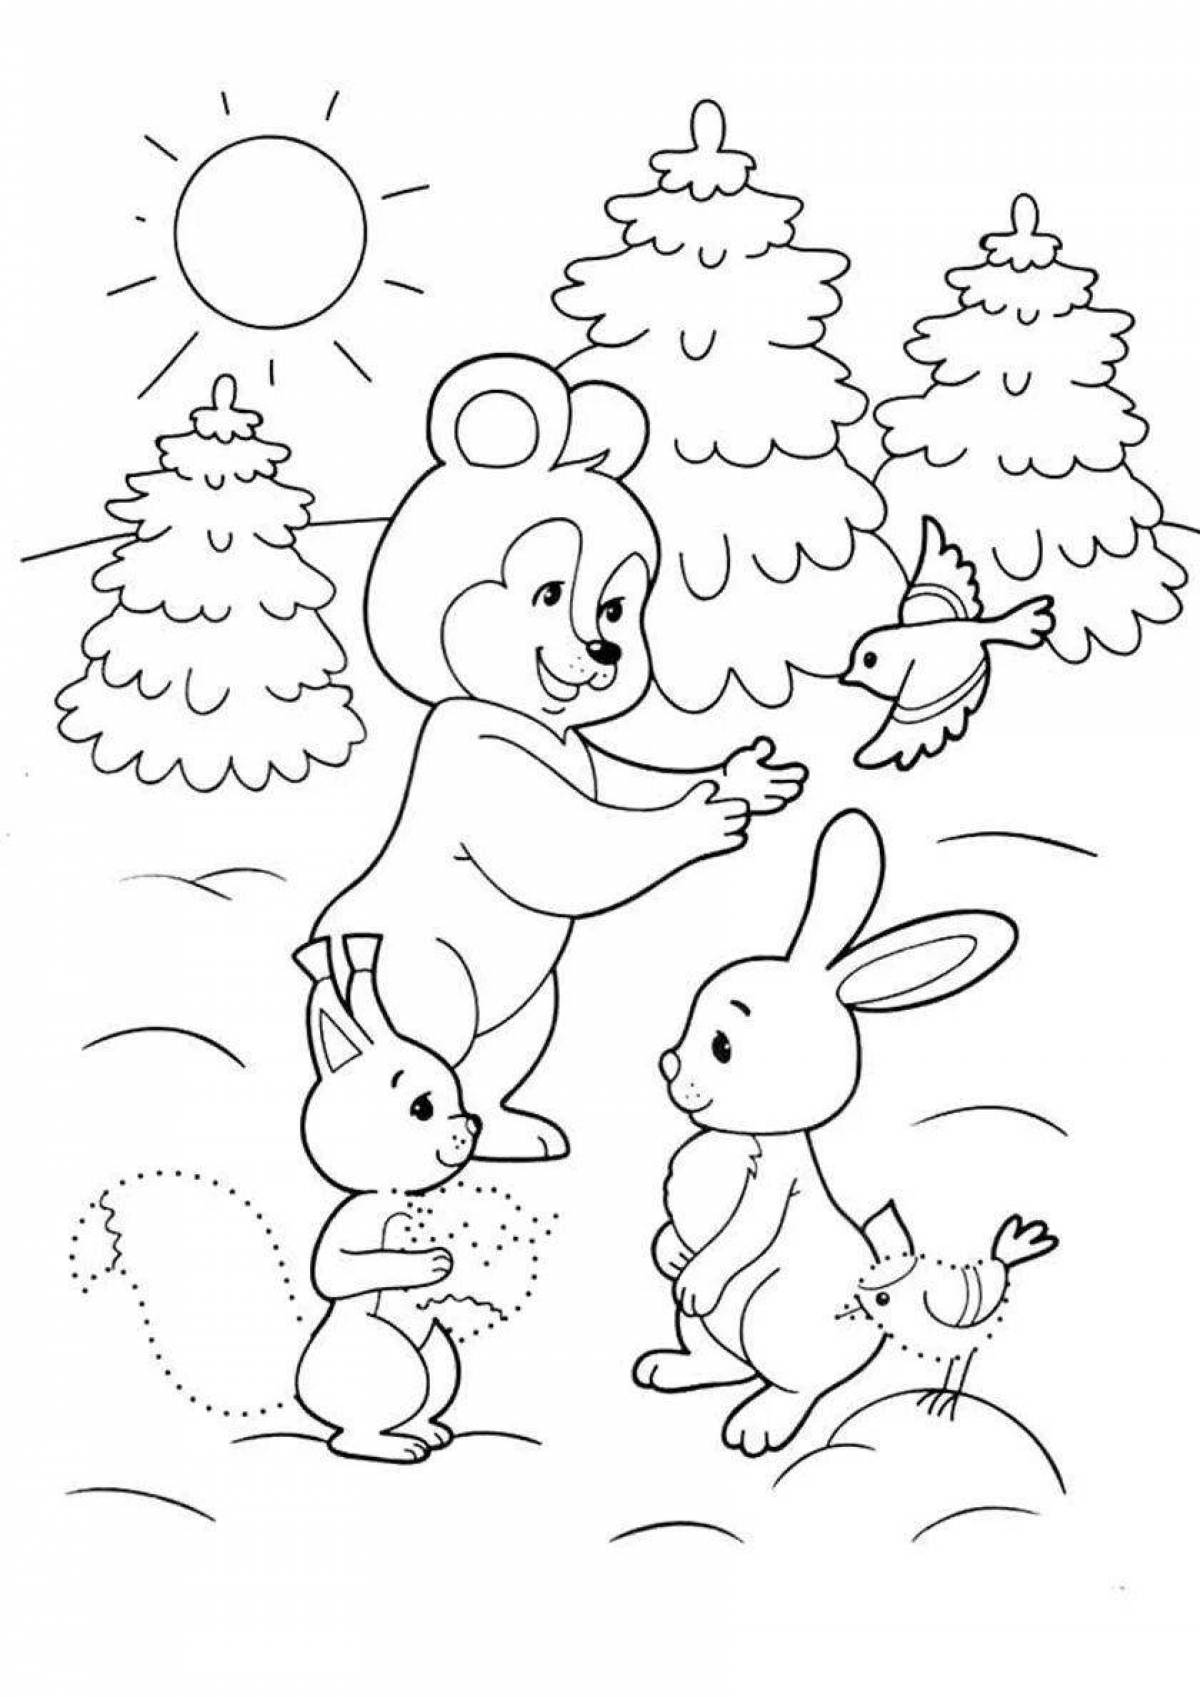 Coloring page amazing winter in the forest